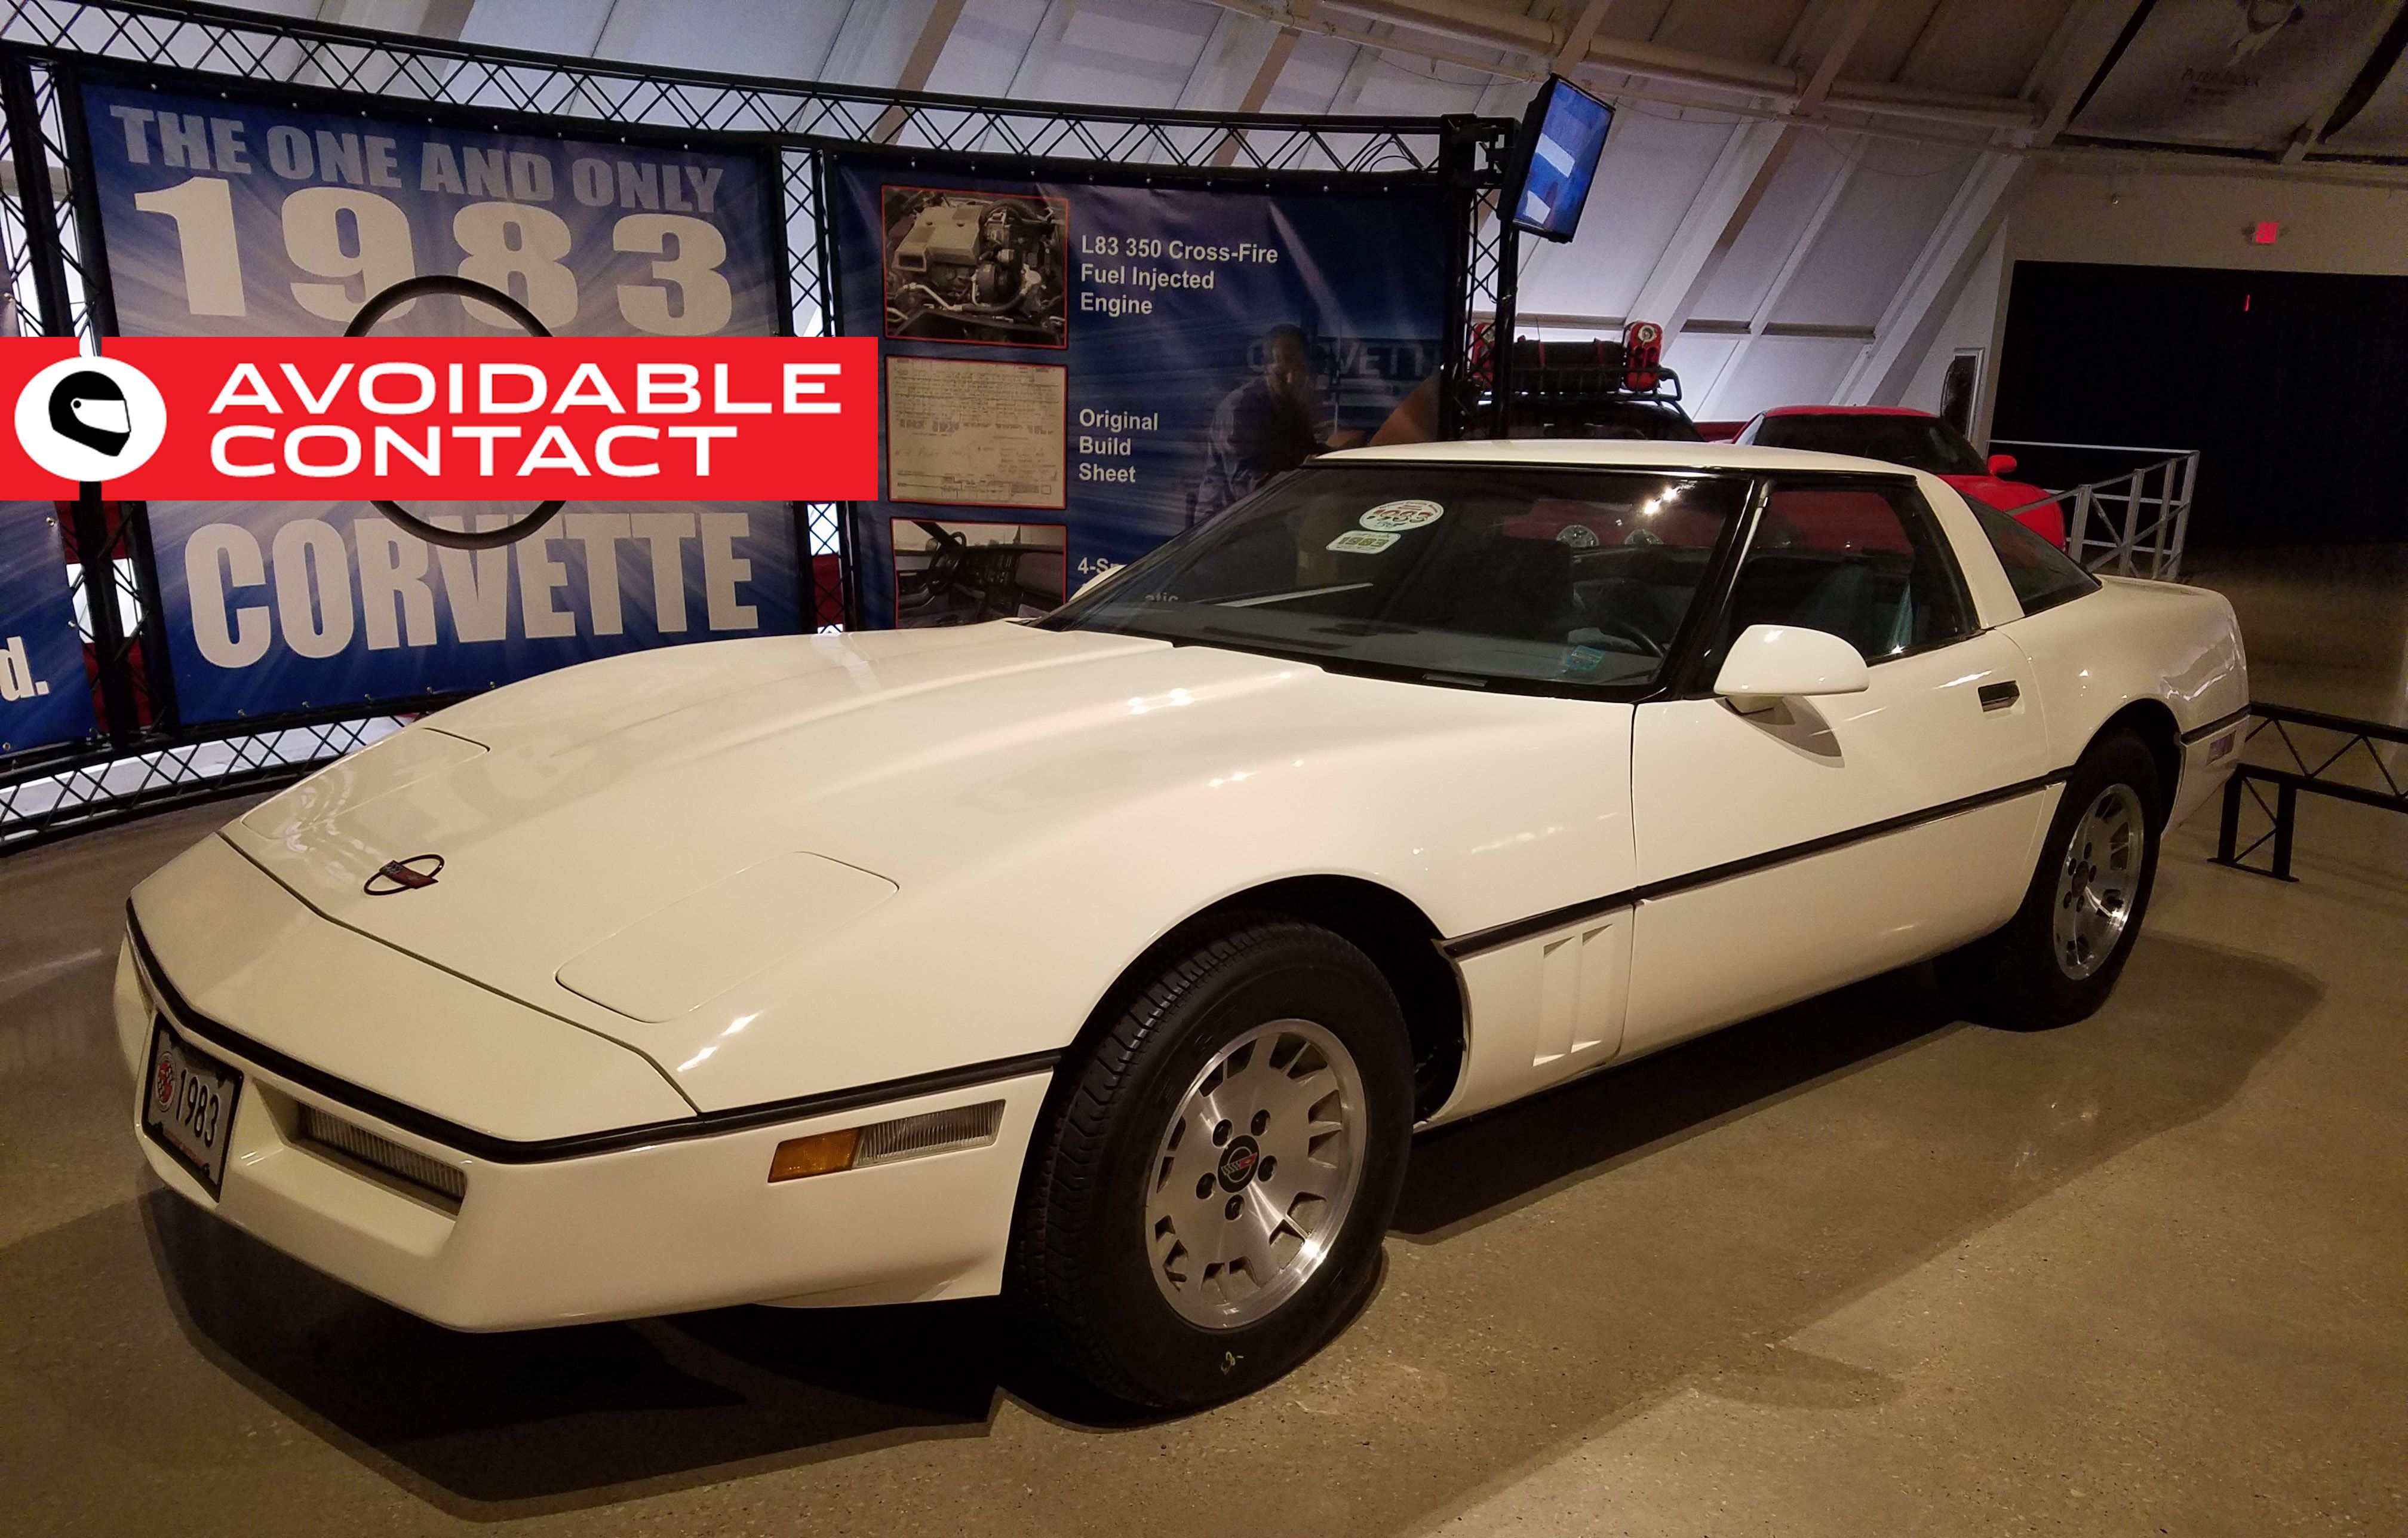 The Importance of the World's Only 1983 Corvette